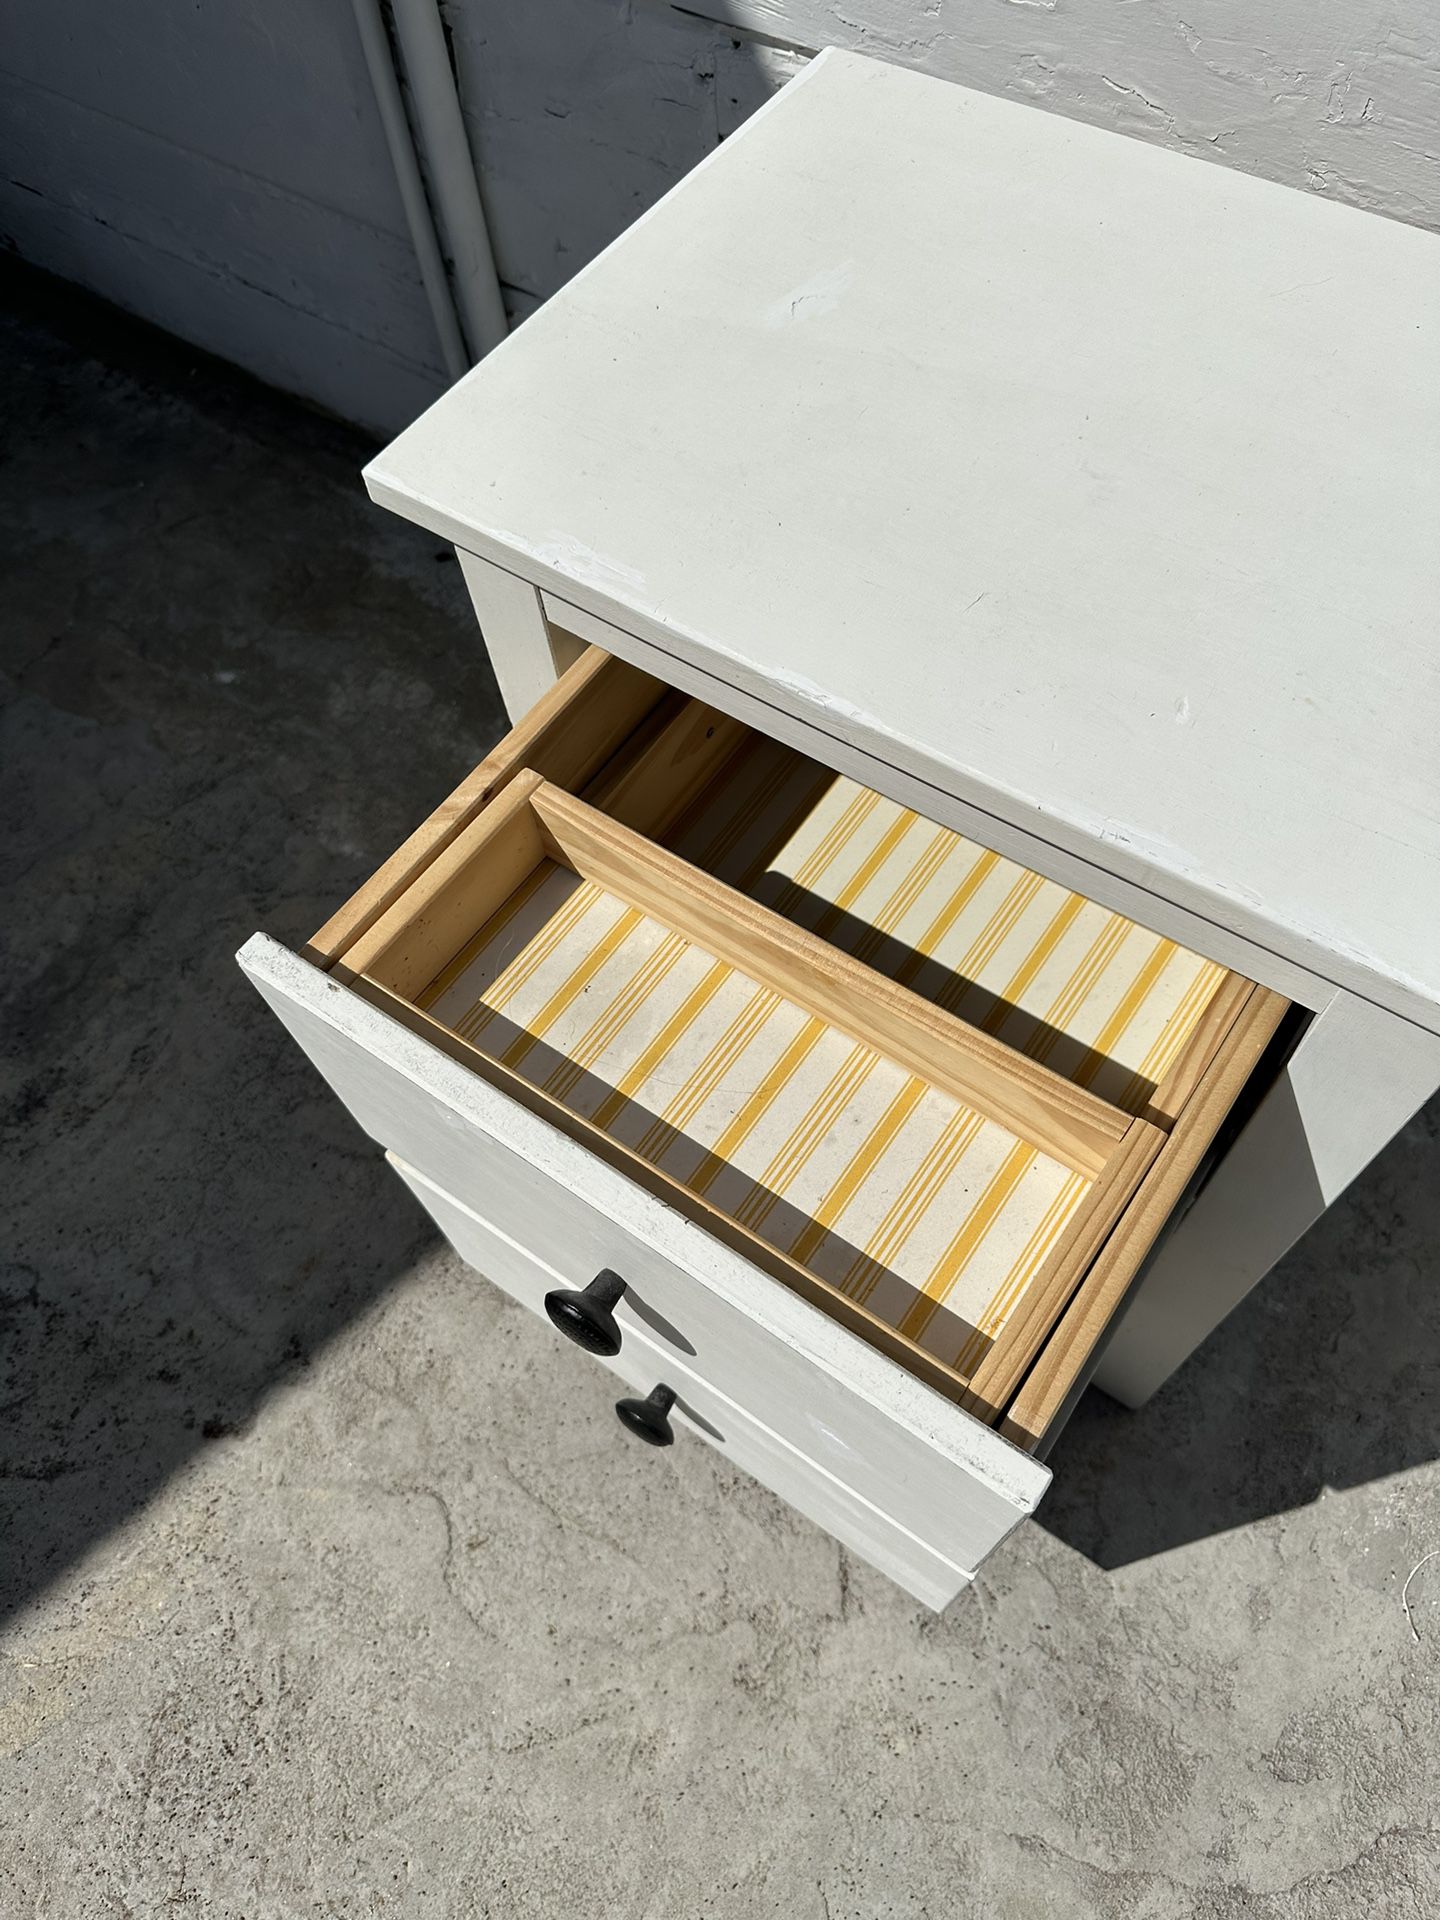 Chic Wooden White Nightstand with Drawers and Sliding Storage Organizer  - SIZE: 22”w x 15.5”d x 25.5”h